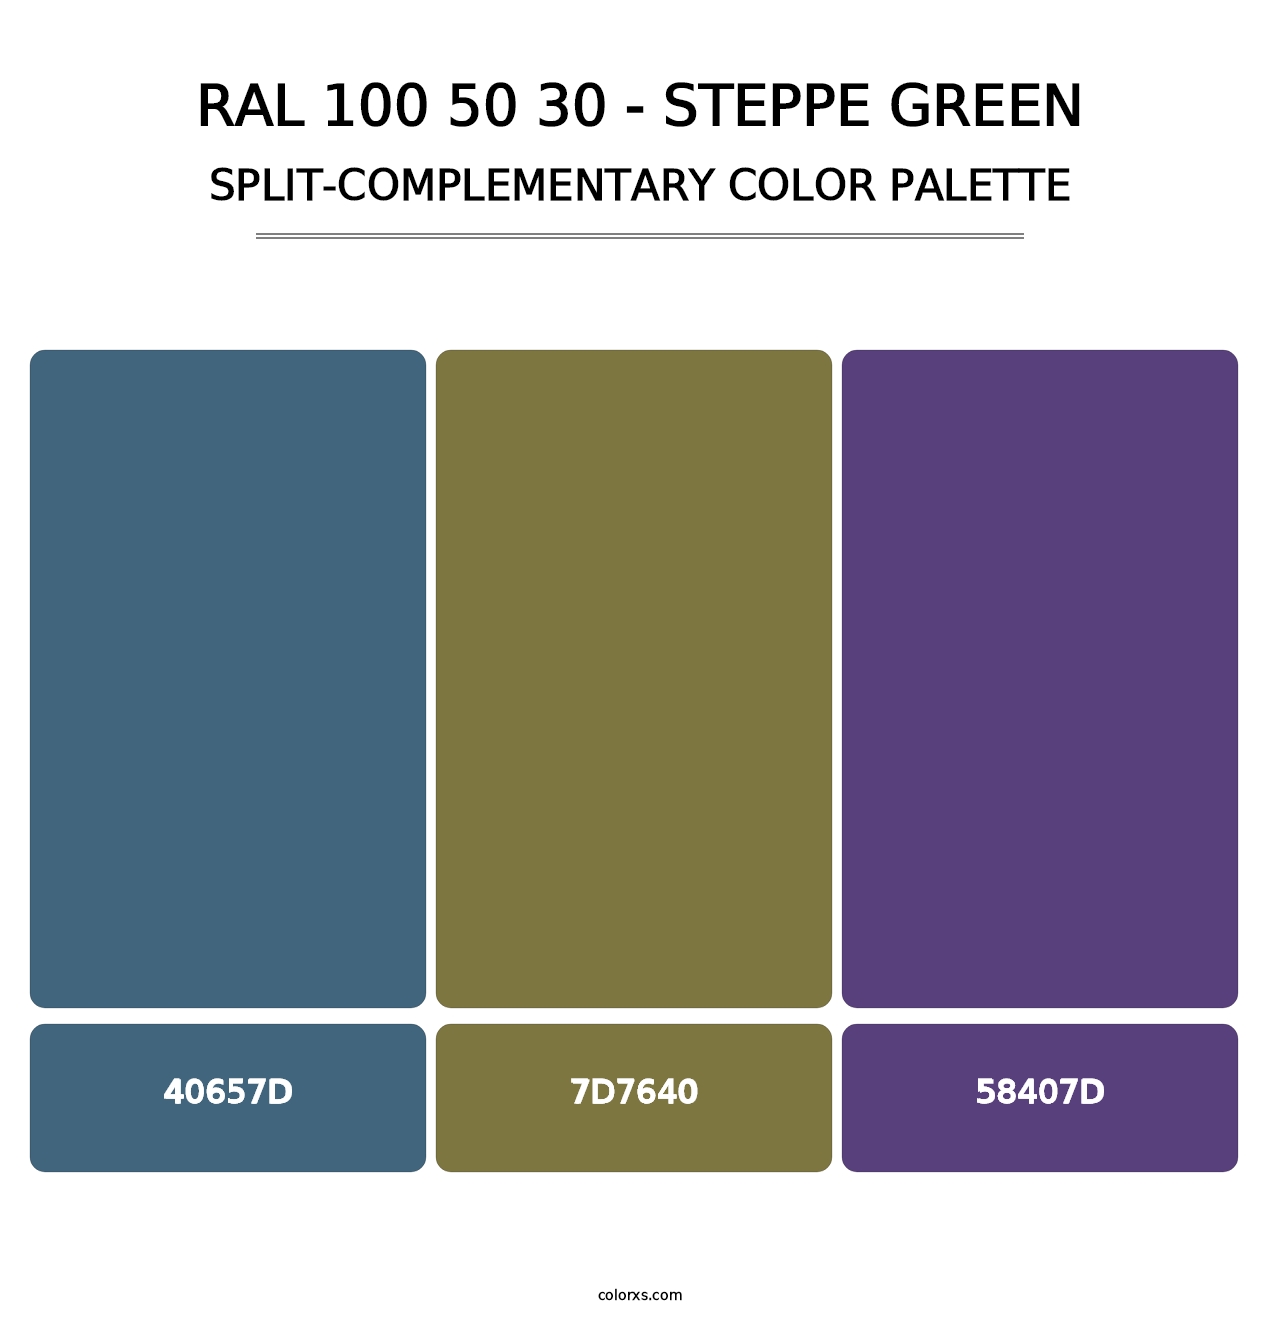 RAL 100 50 30 - Steppe Green - Split-Complementary Color Palette